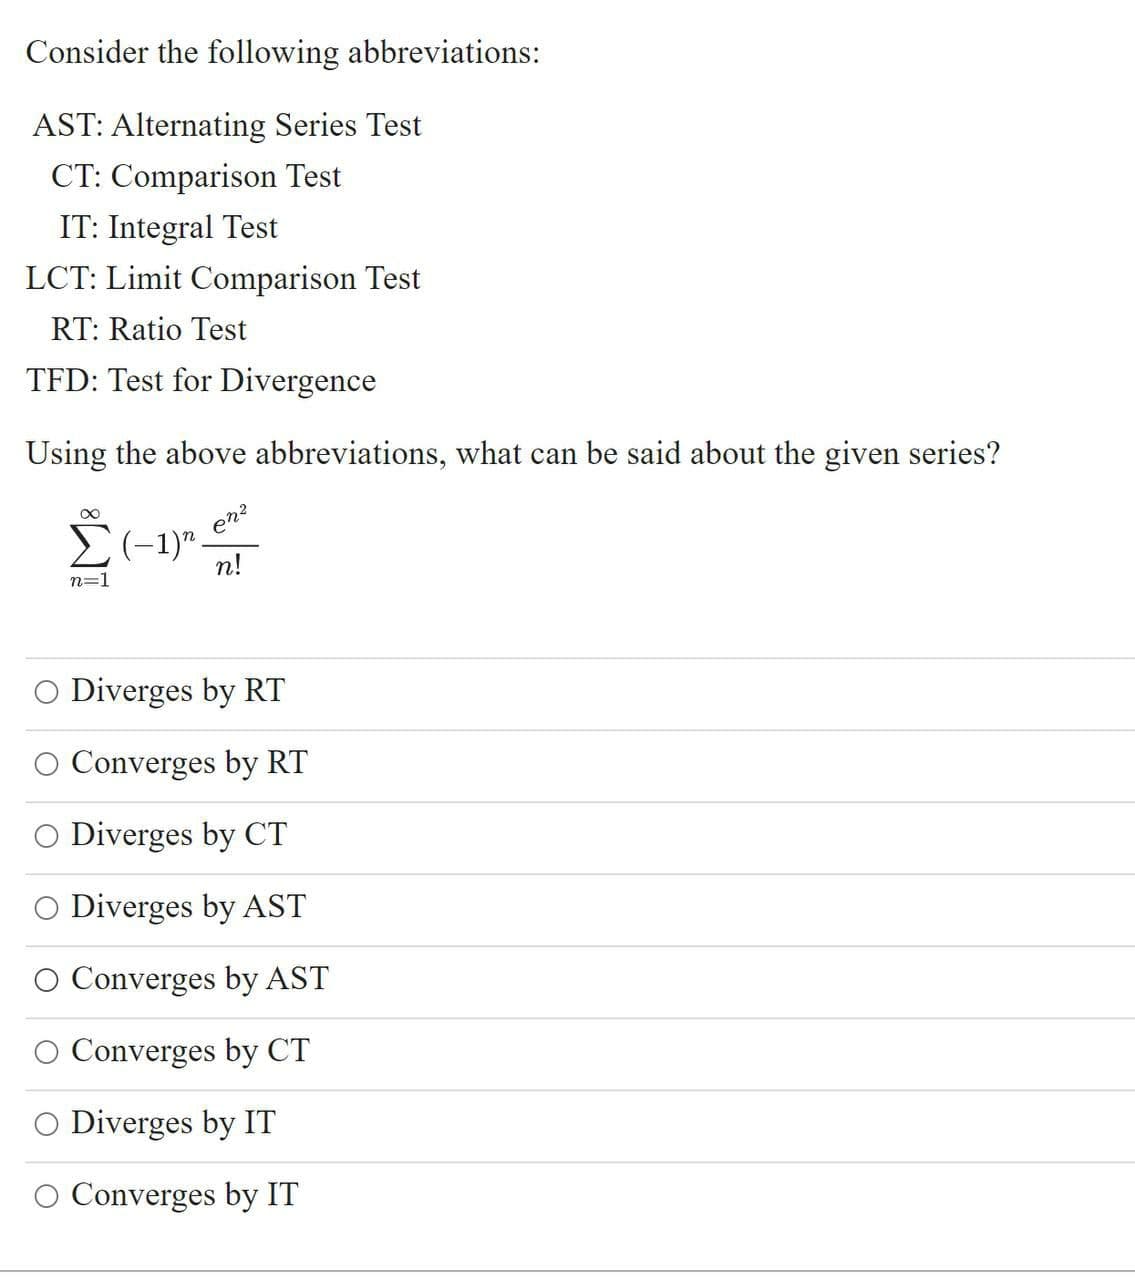 Consider the following abbreviations:
AST: Alternating Series Test
CT: Comparison Test
IT: Integral Test
LCT: Limit Comparison Test
RT: Ratio Test
TFD: Test for Divergence
Using the above abbreviations, what can be said about the given series?
en?
n!
n=1
O Diverges by RT
Converges by RT
O Diverges by CT
O Diverges by AST
O Converges by AST
O Converges by CT
O Diverges by IT
O Converges by IT
